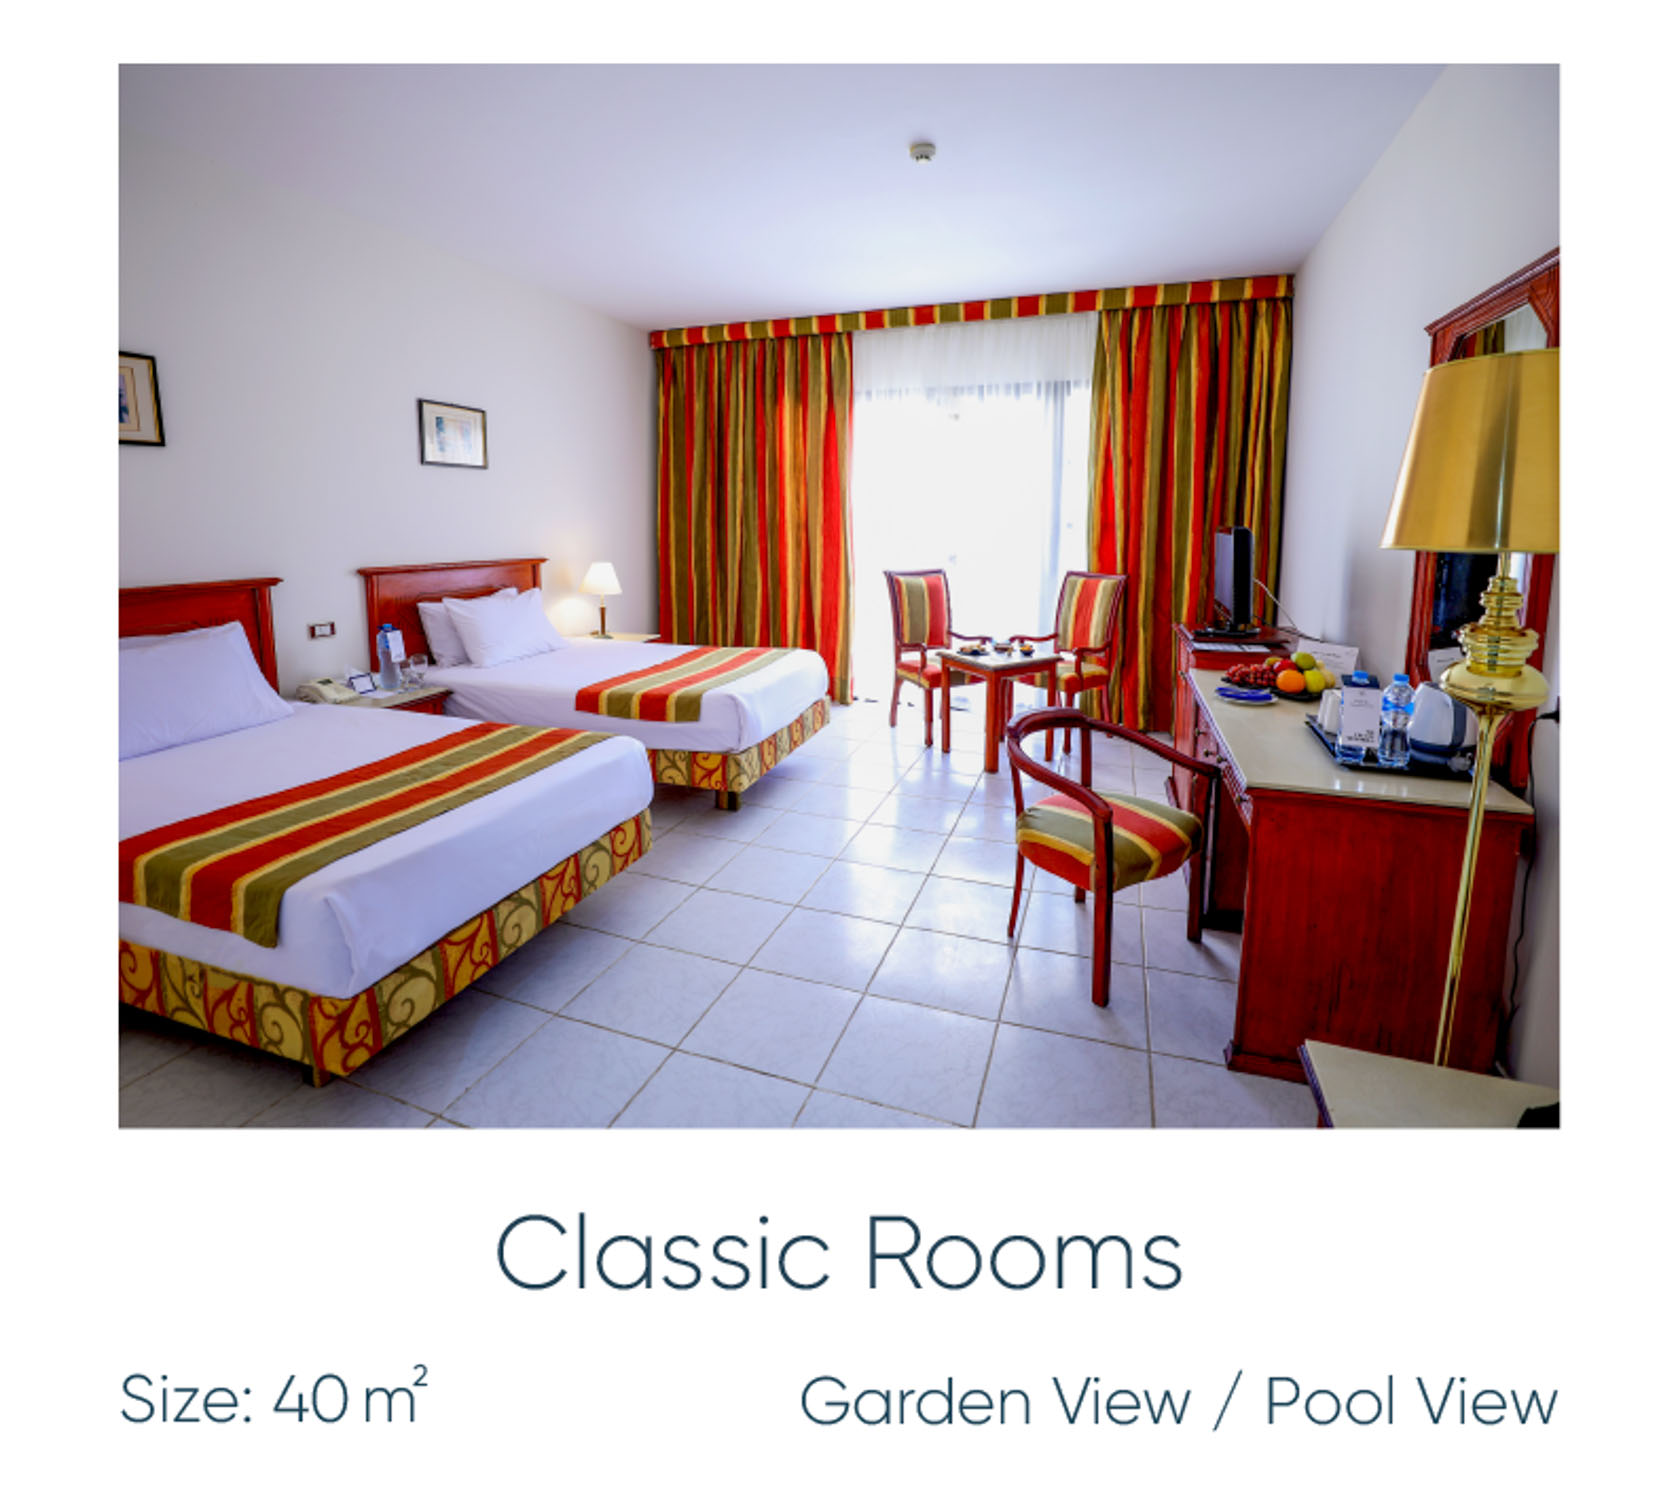 Discover-rooms-classic